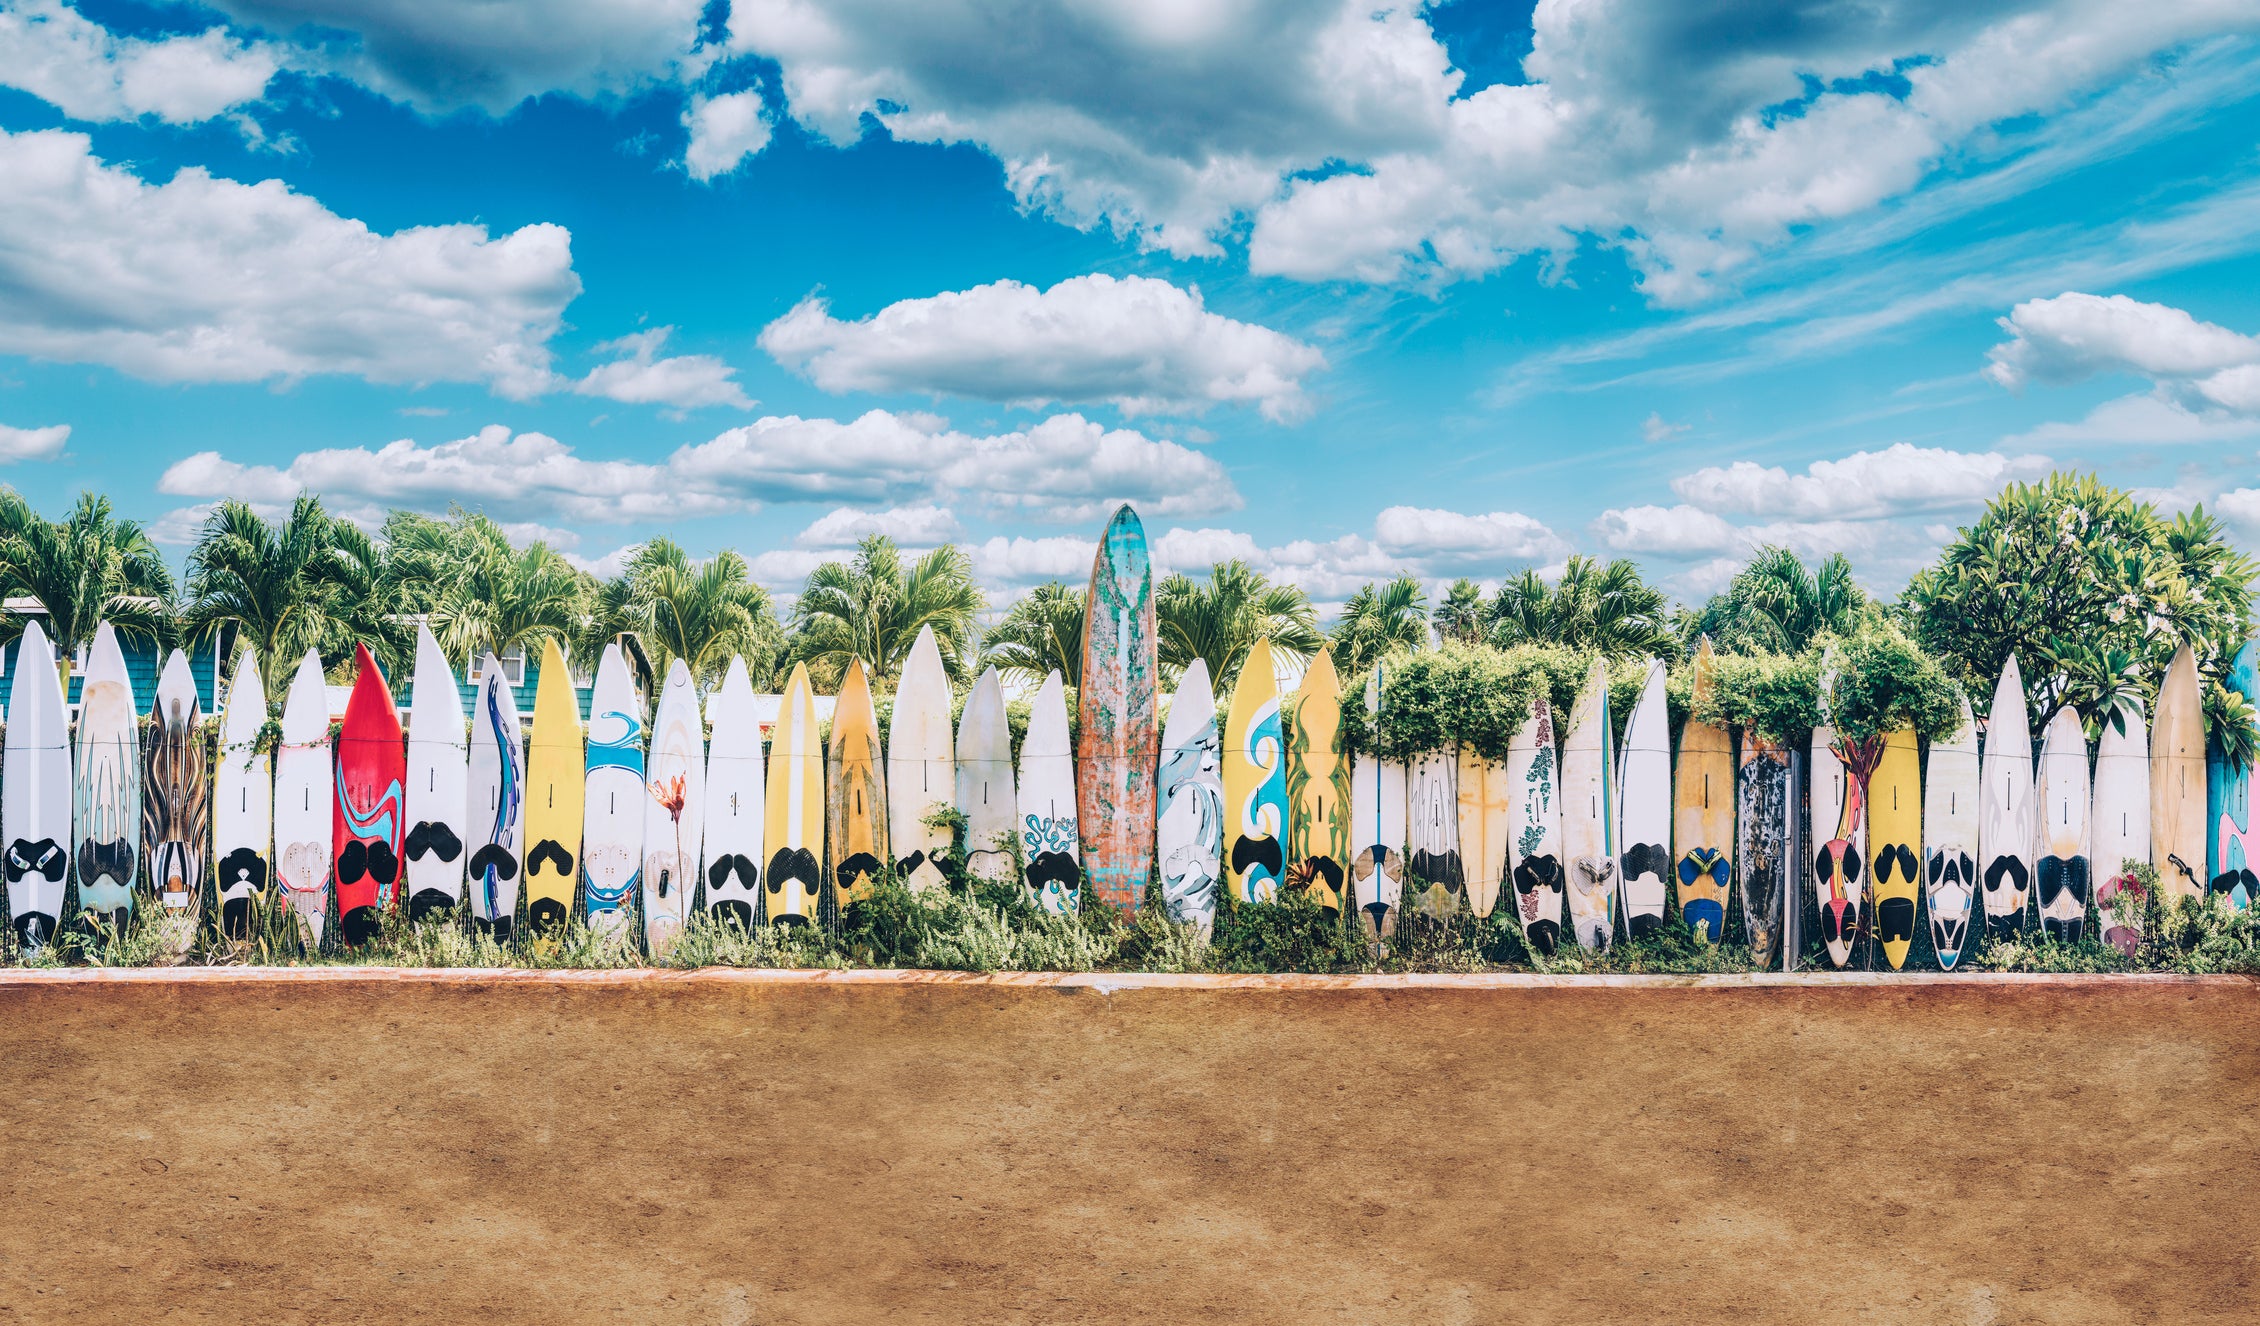 surfboards lined up on Maui beach